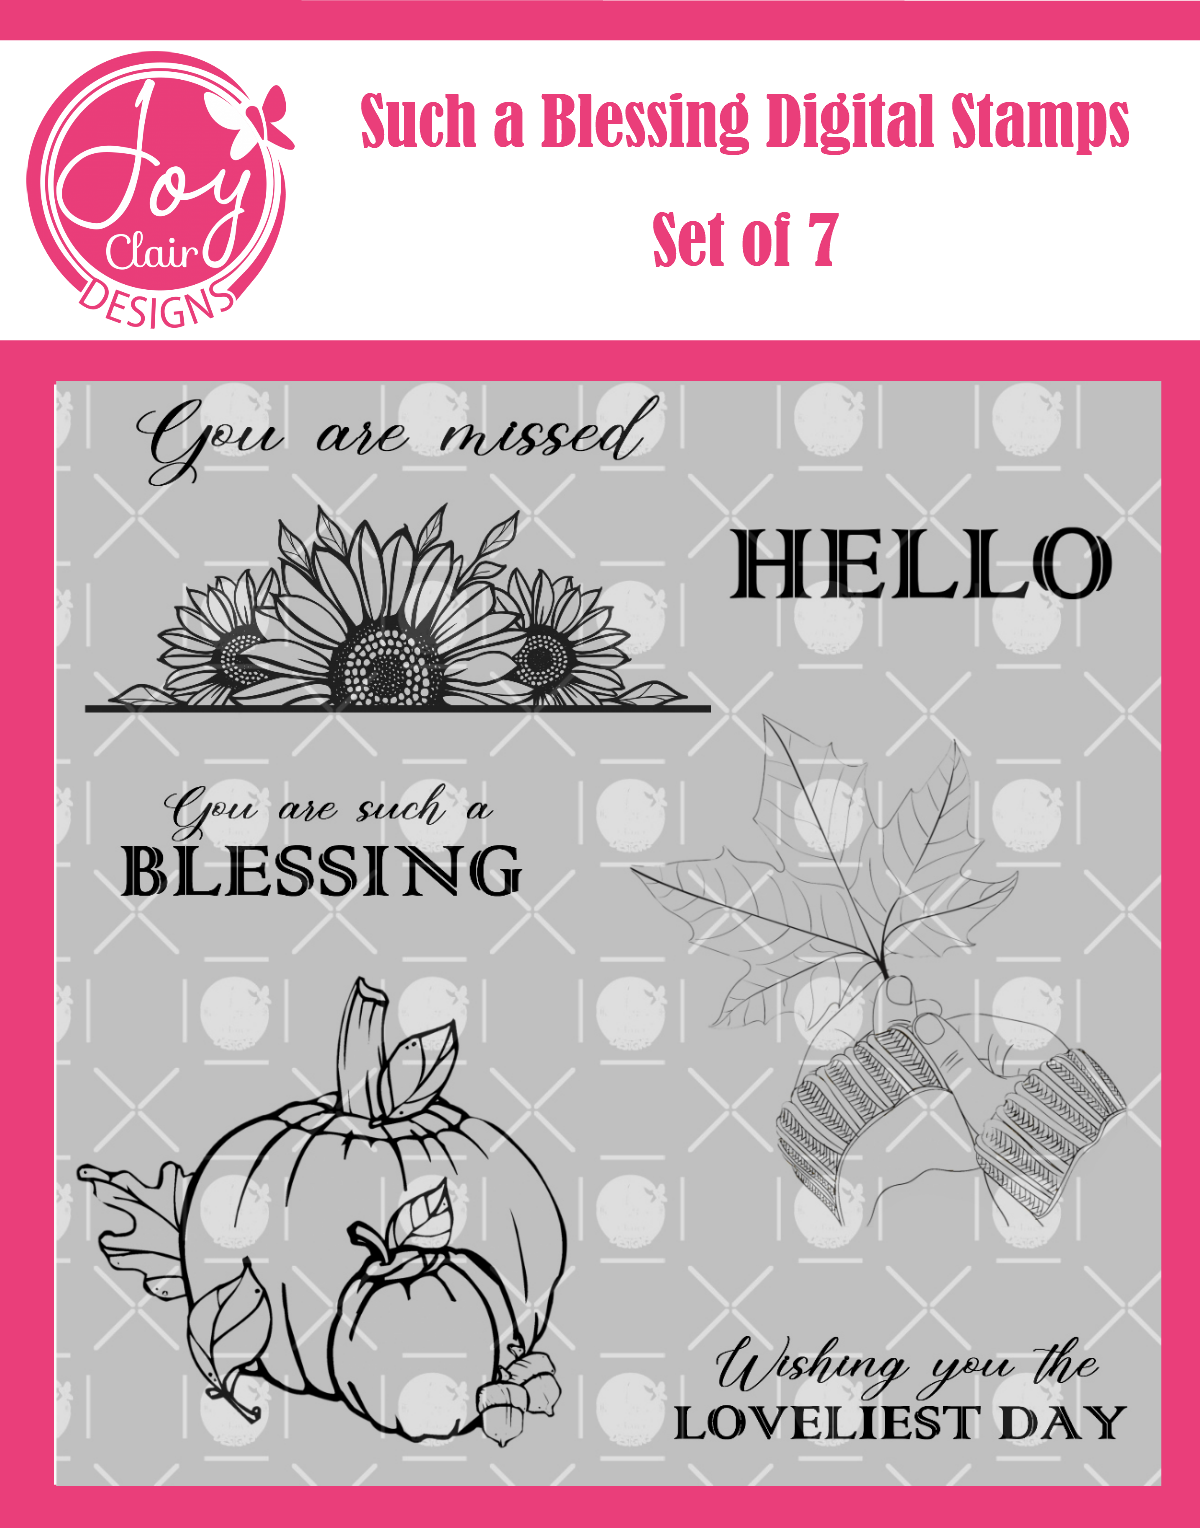 Such a Blessing Digital Stamp Set